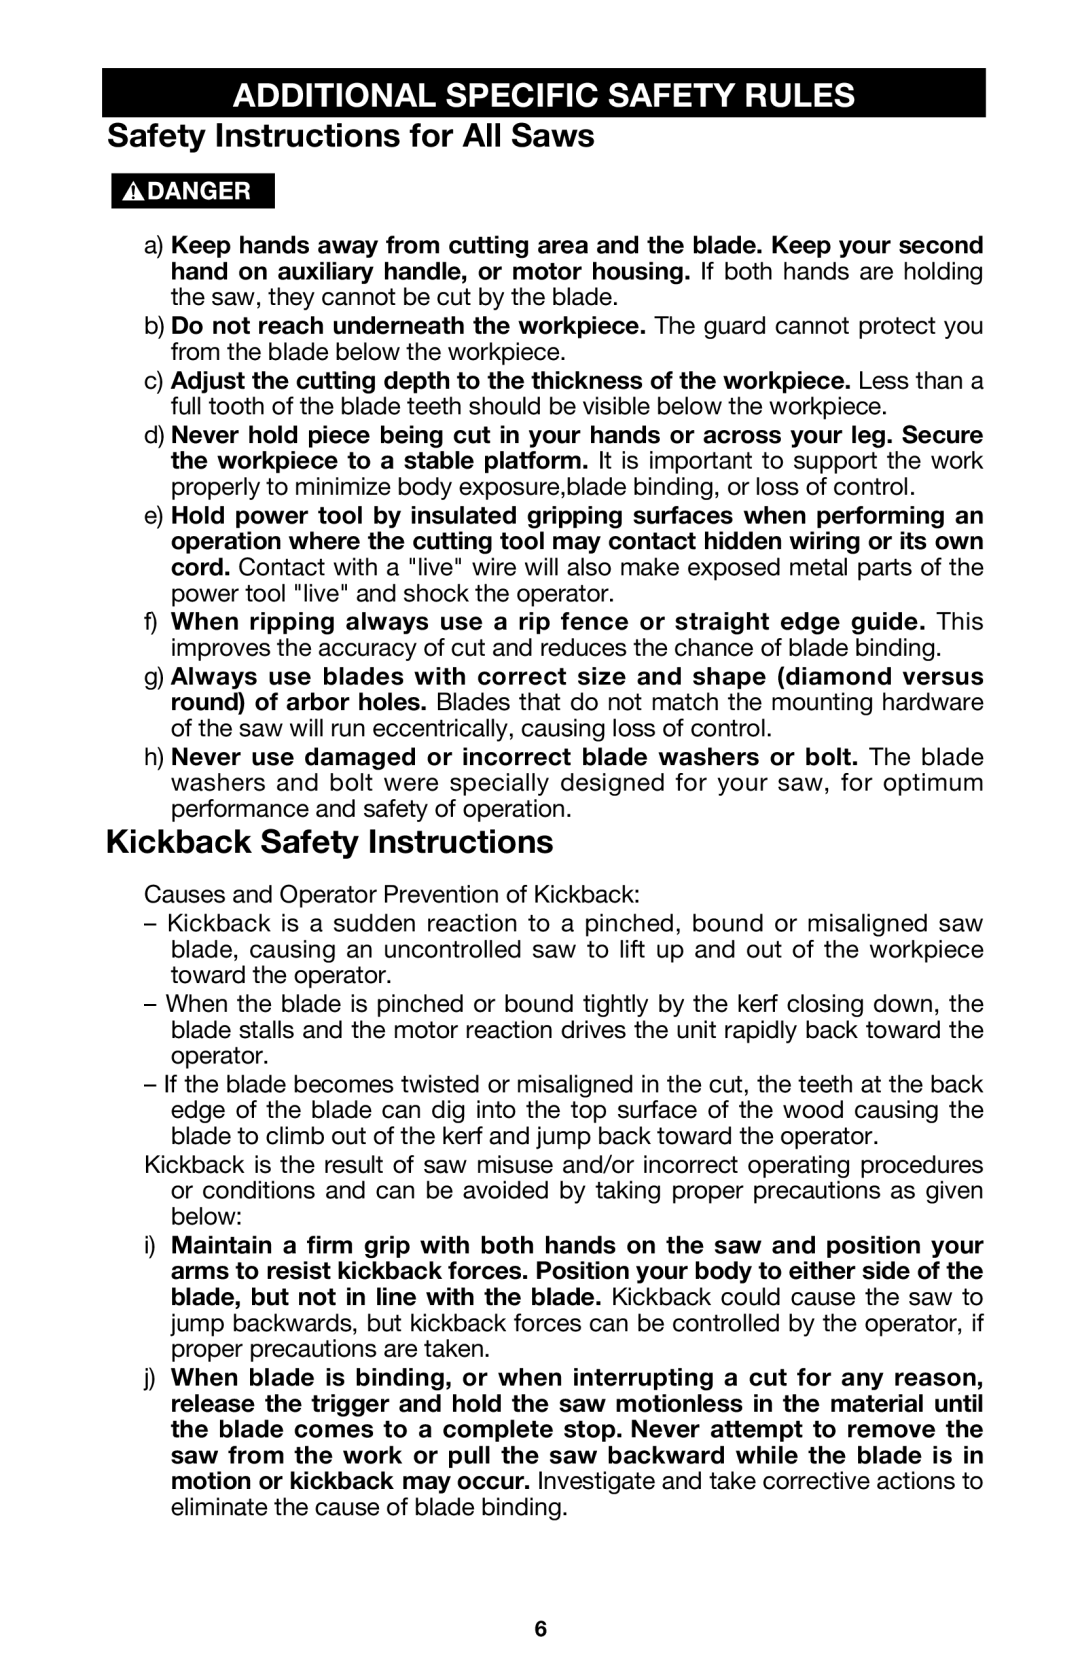 PYLE Audio 314 Additional Specific Safety Rules, Safety Instructions for All Saws, Kickback Safety Instructions 